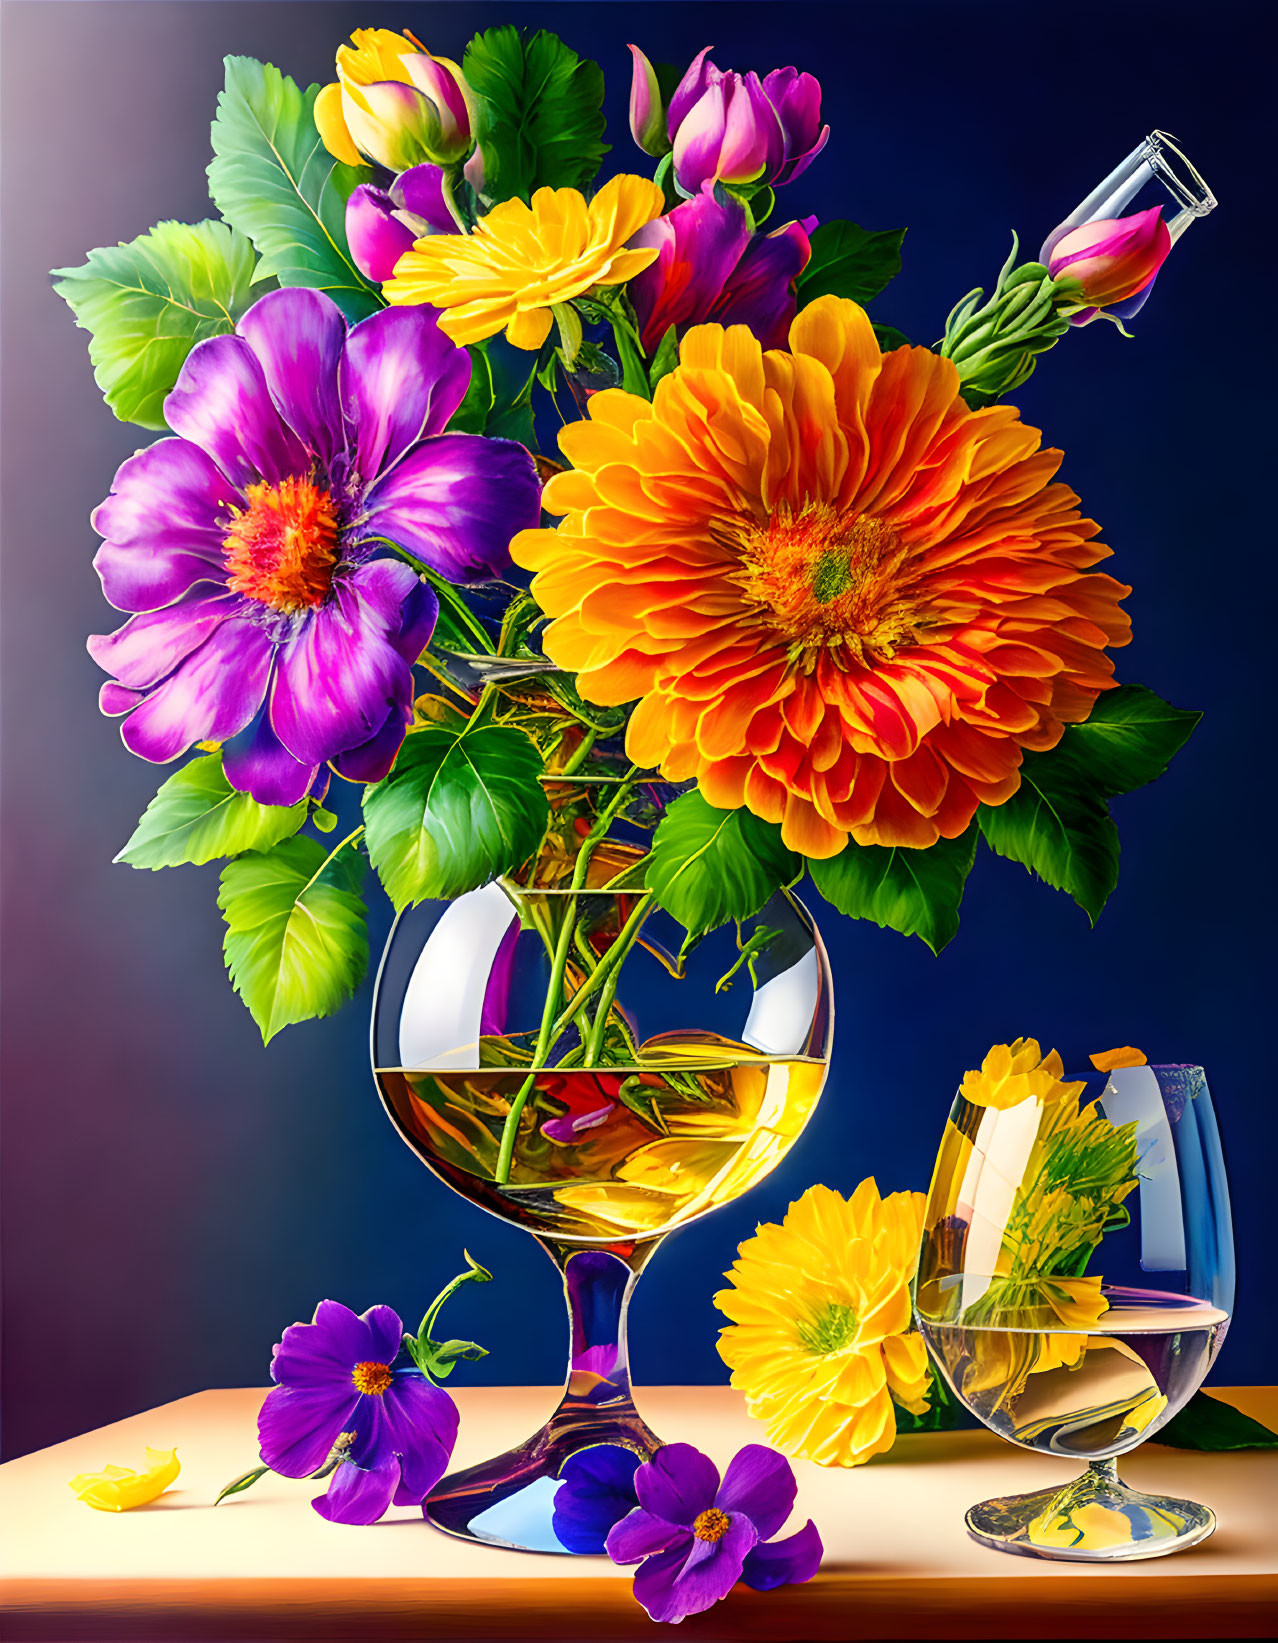 Vibrant flowers in glass vase with wineglass on blue background